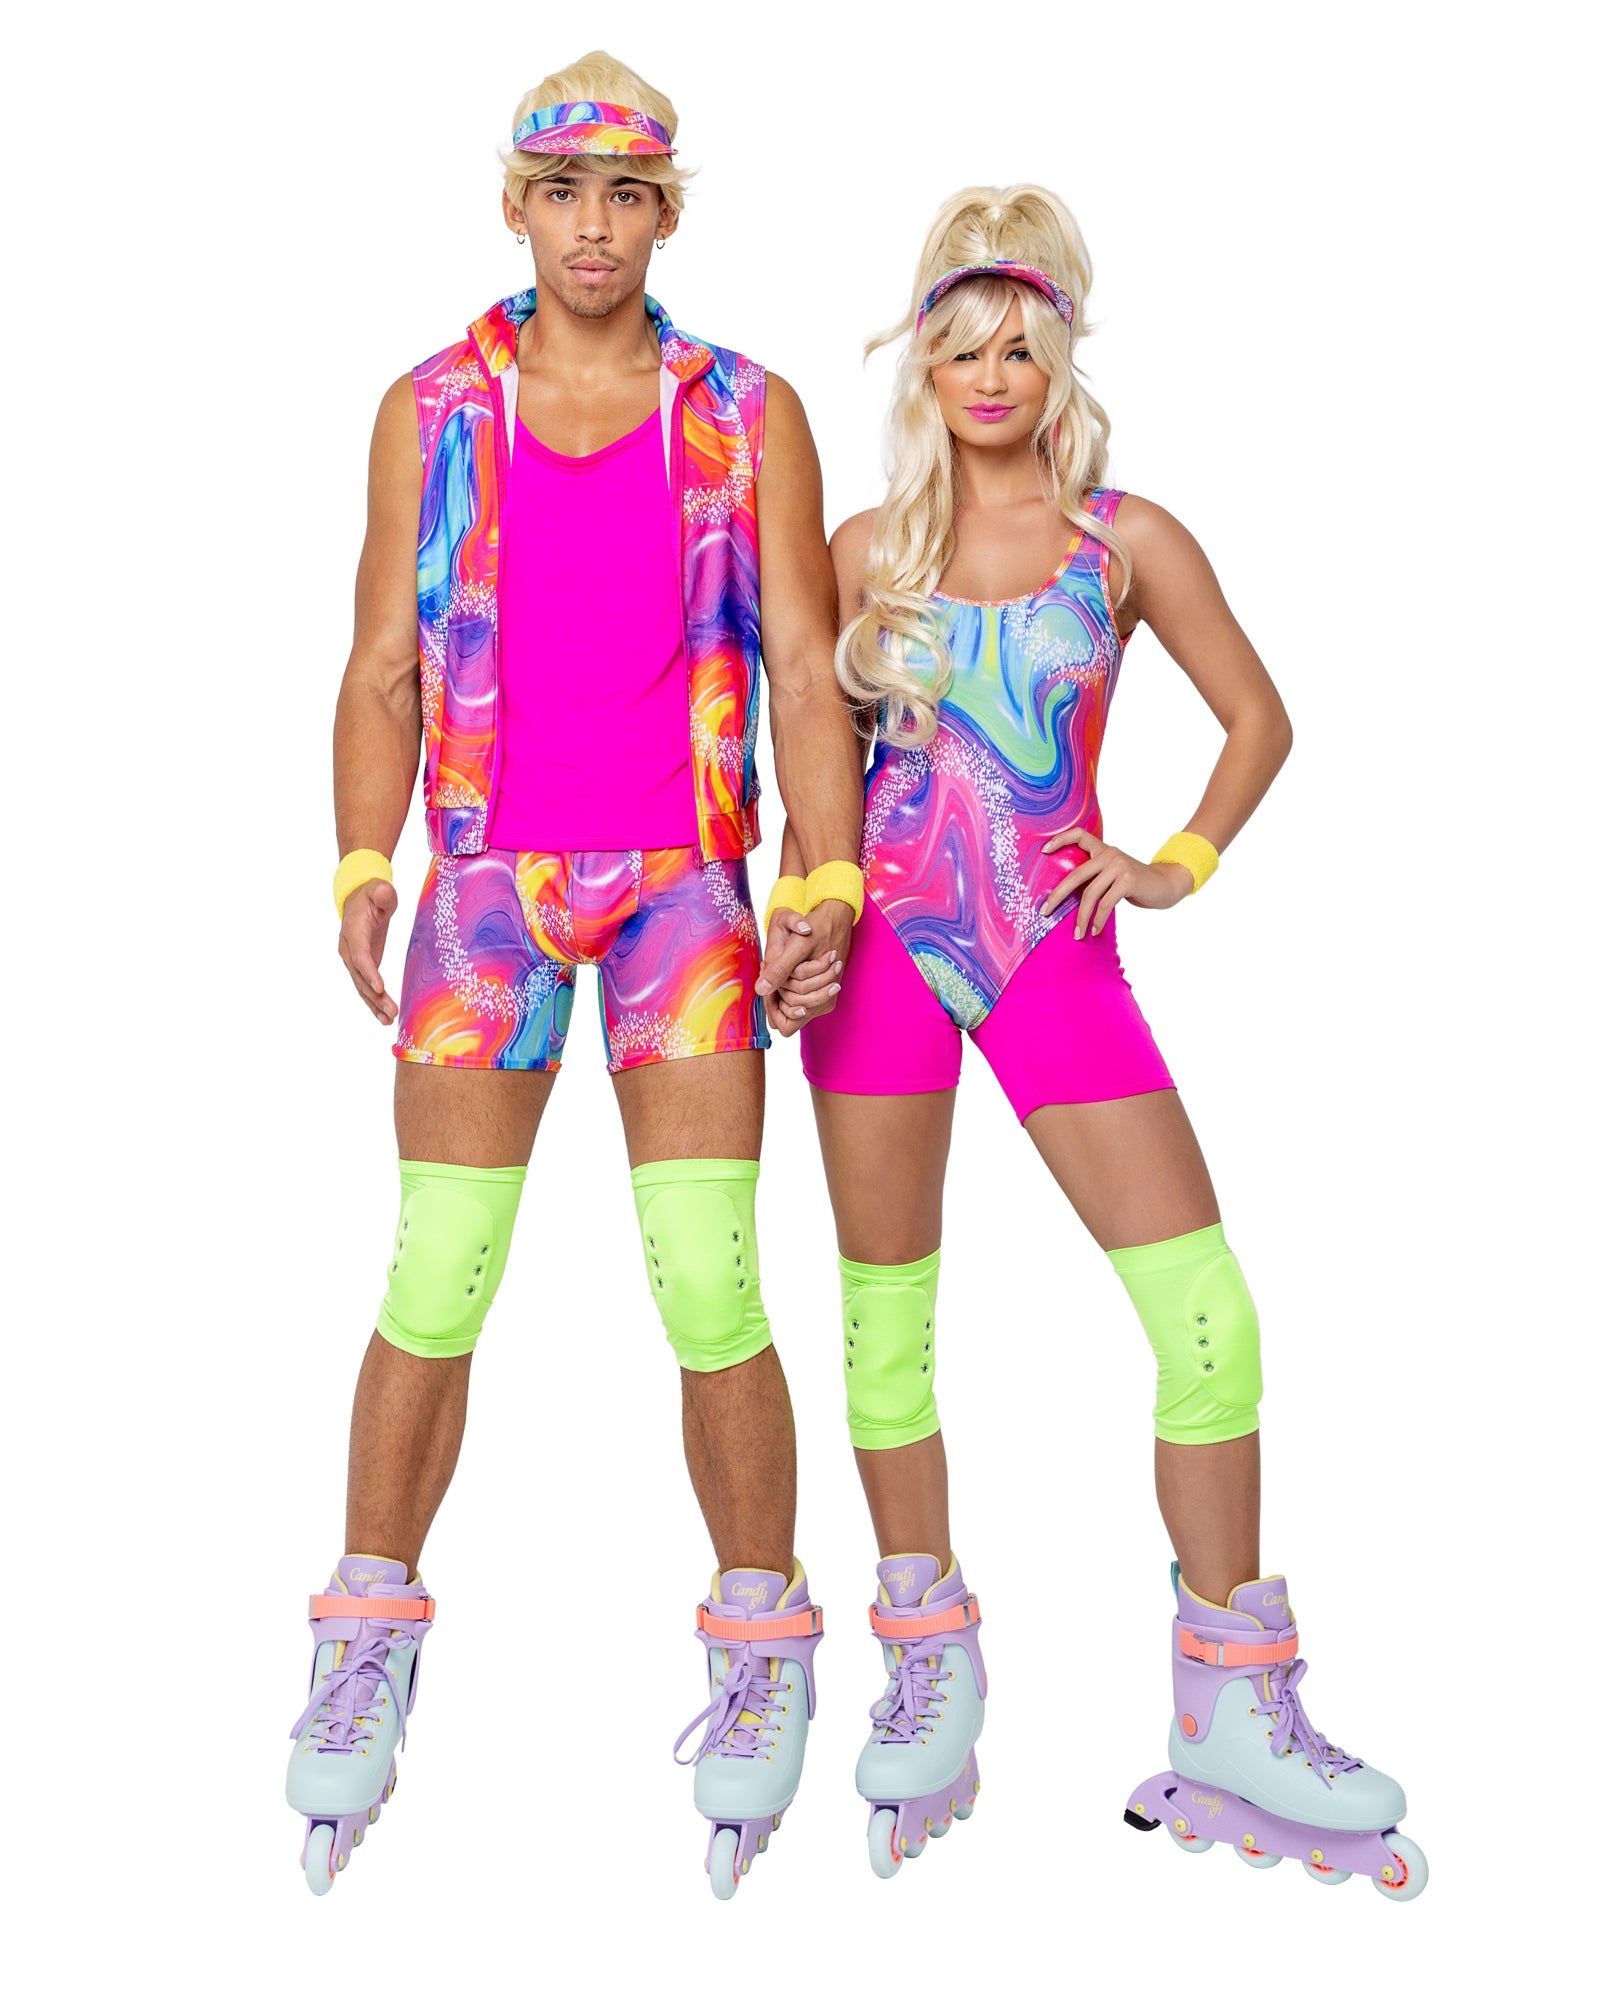 Rollerblade Ken Costume by ROMA in Size S, M, L, or XL